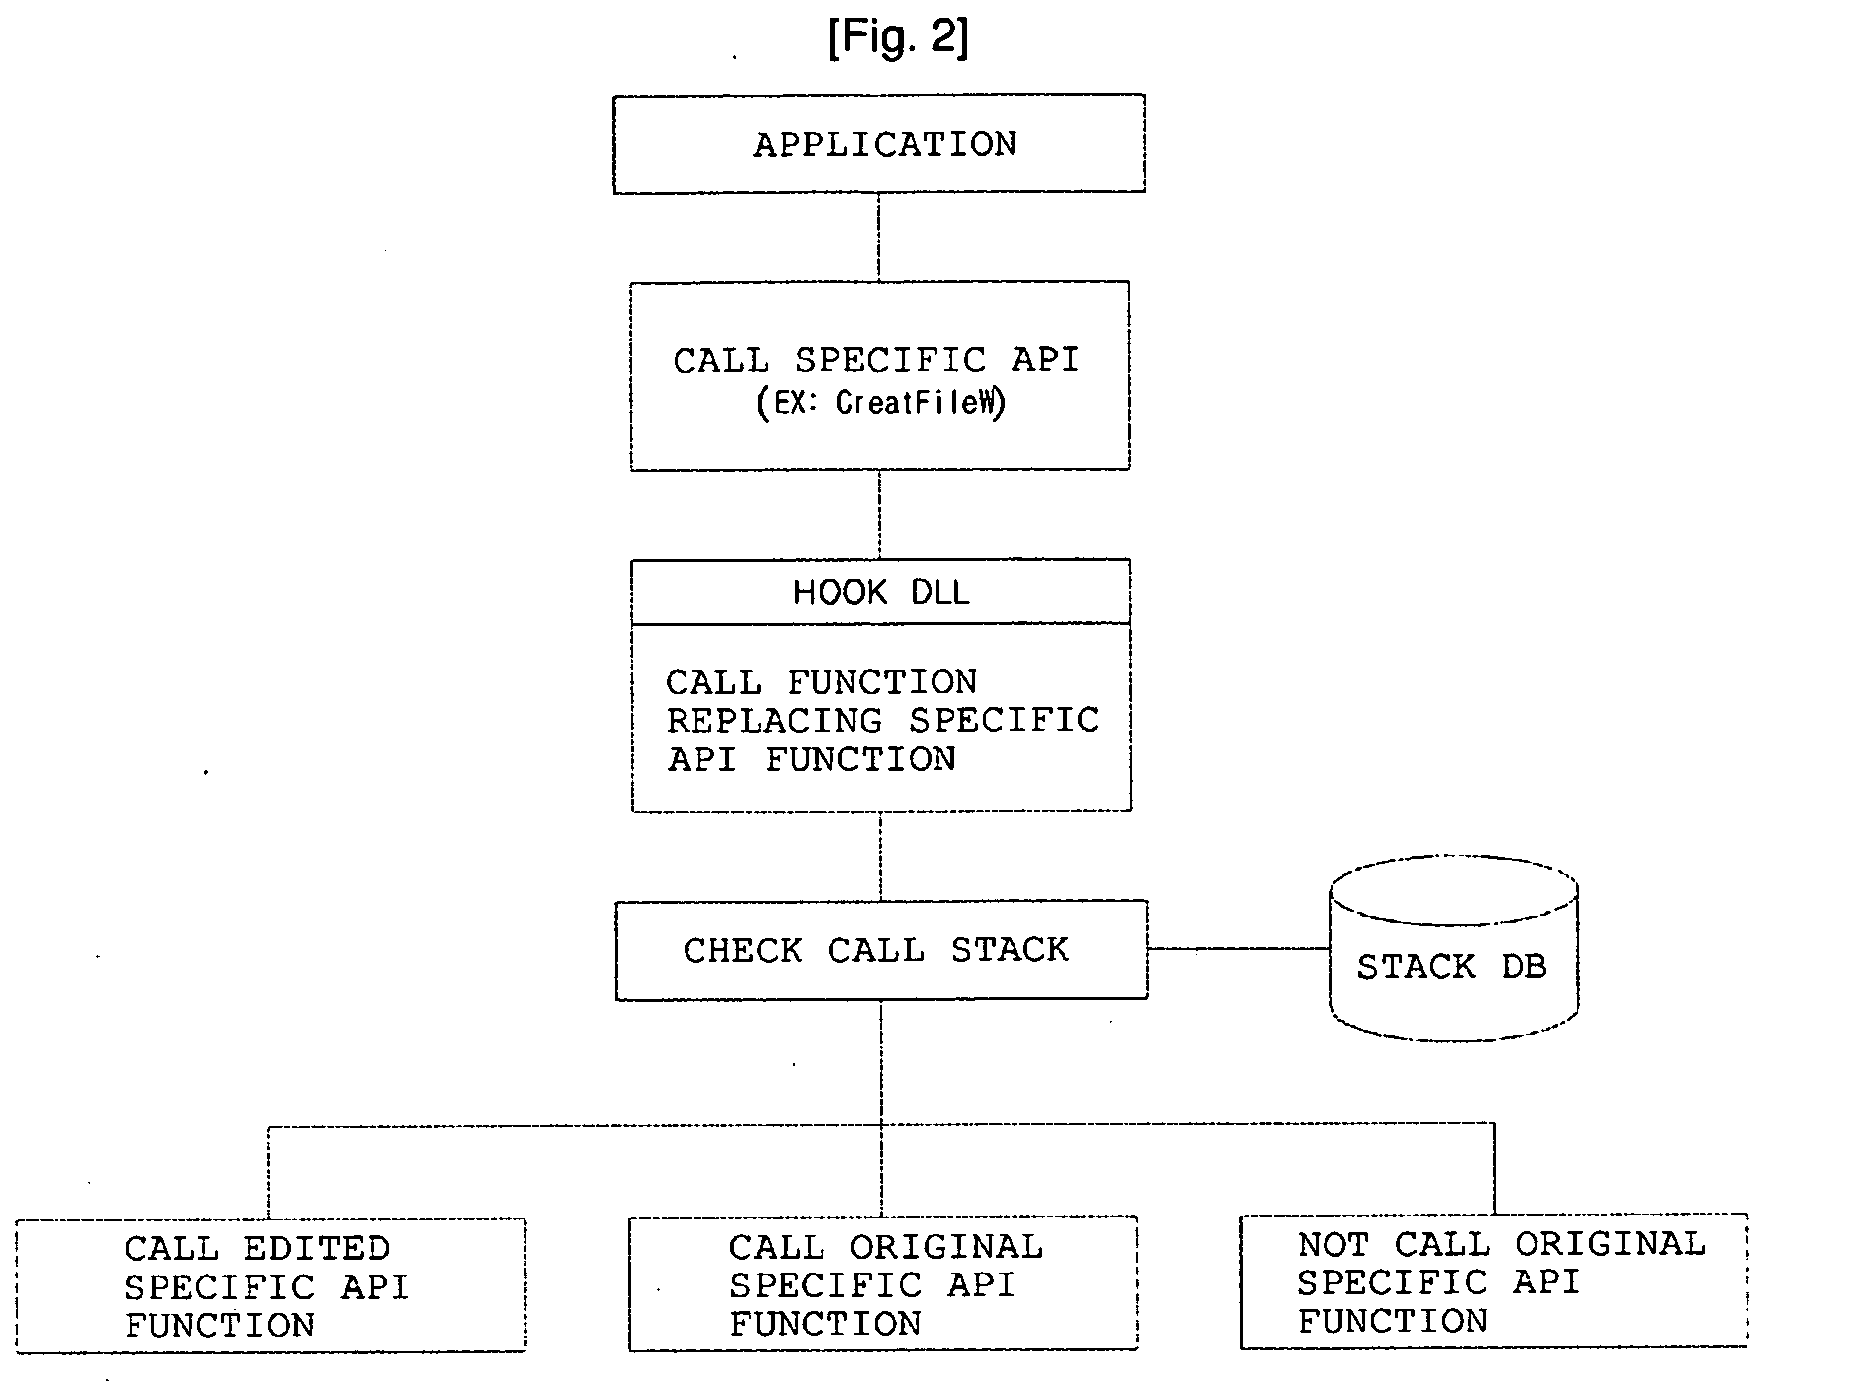 Confirmation method of api by the information at call-stack